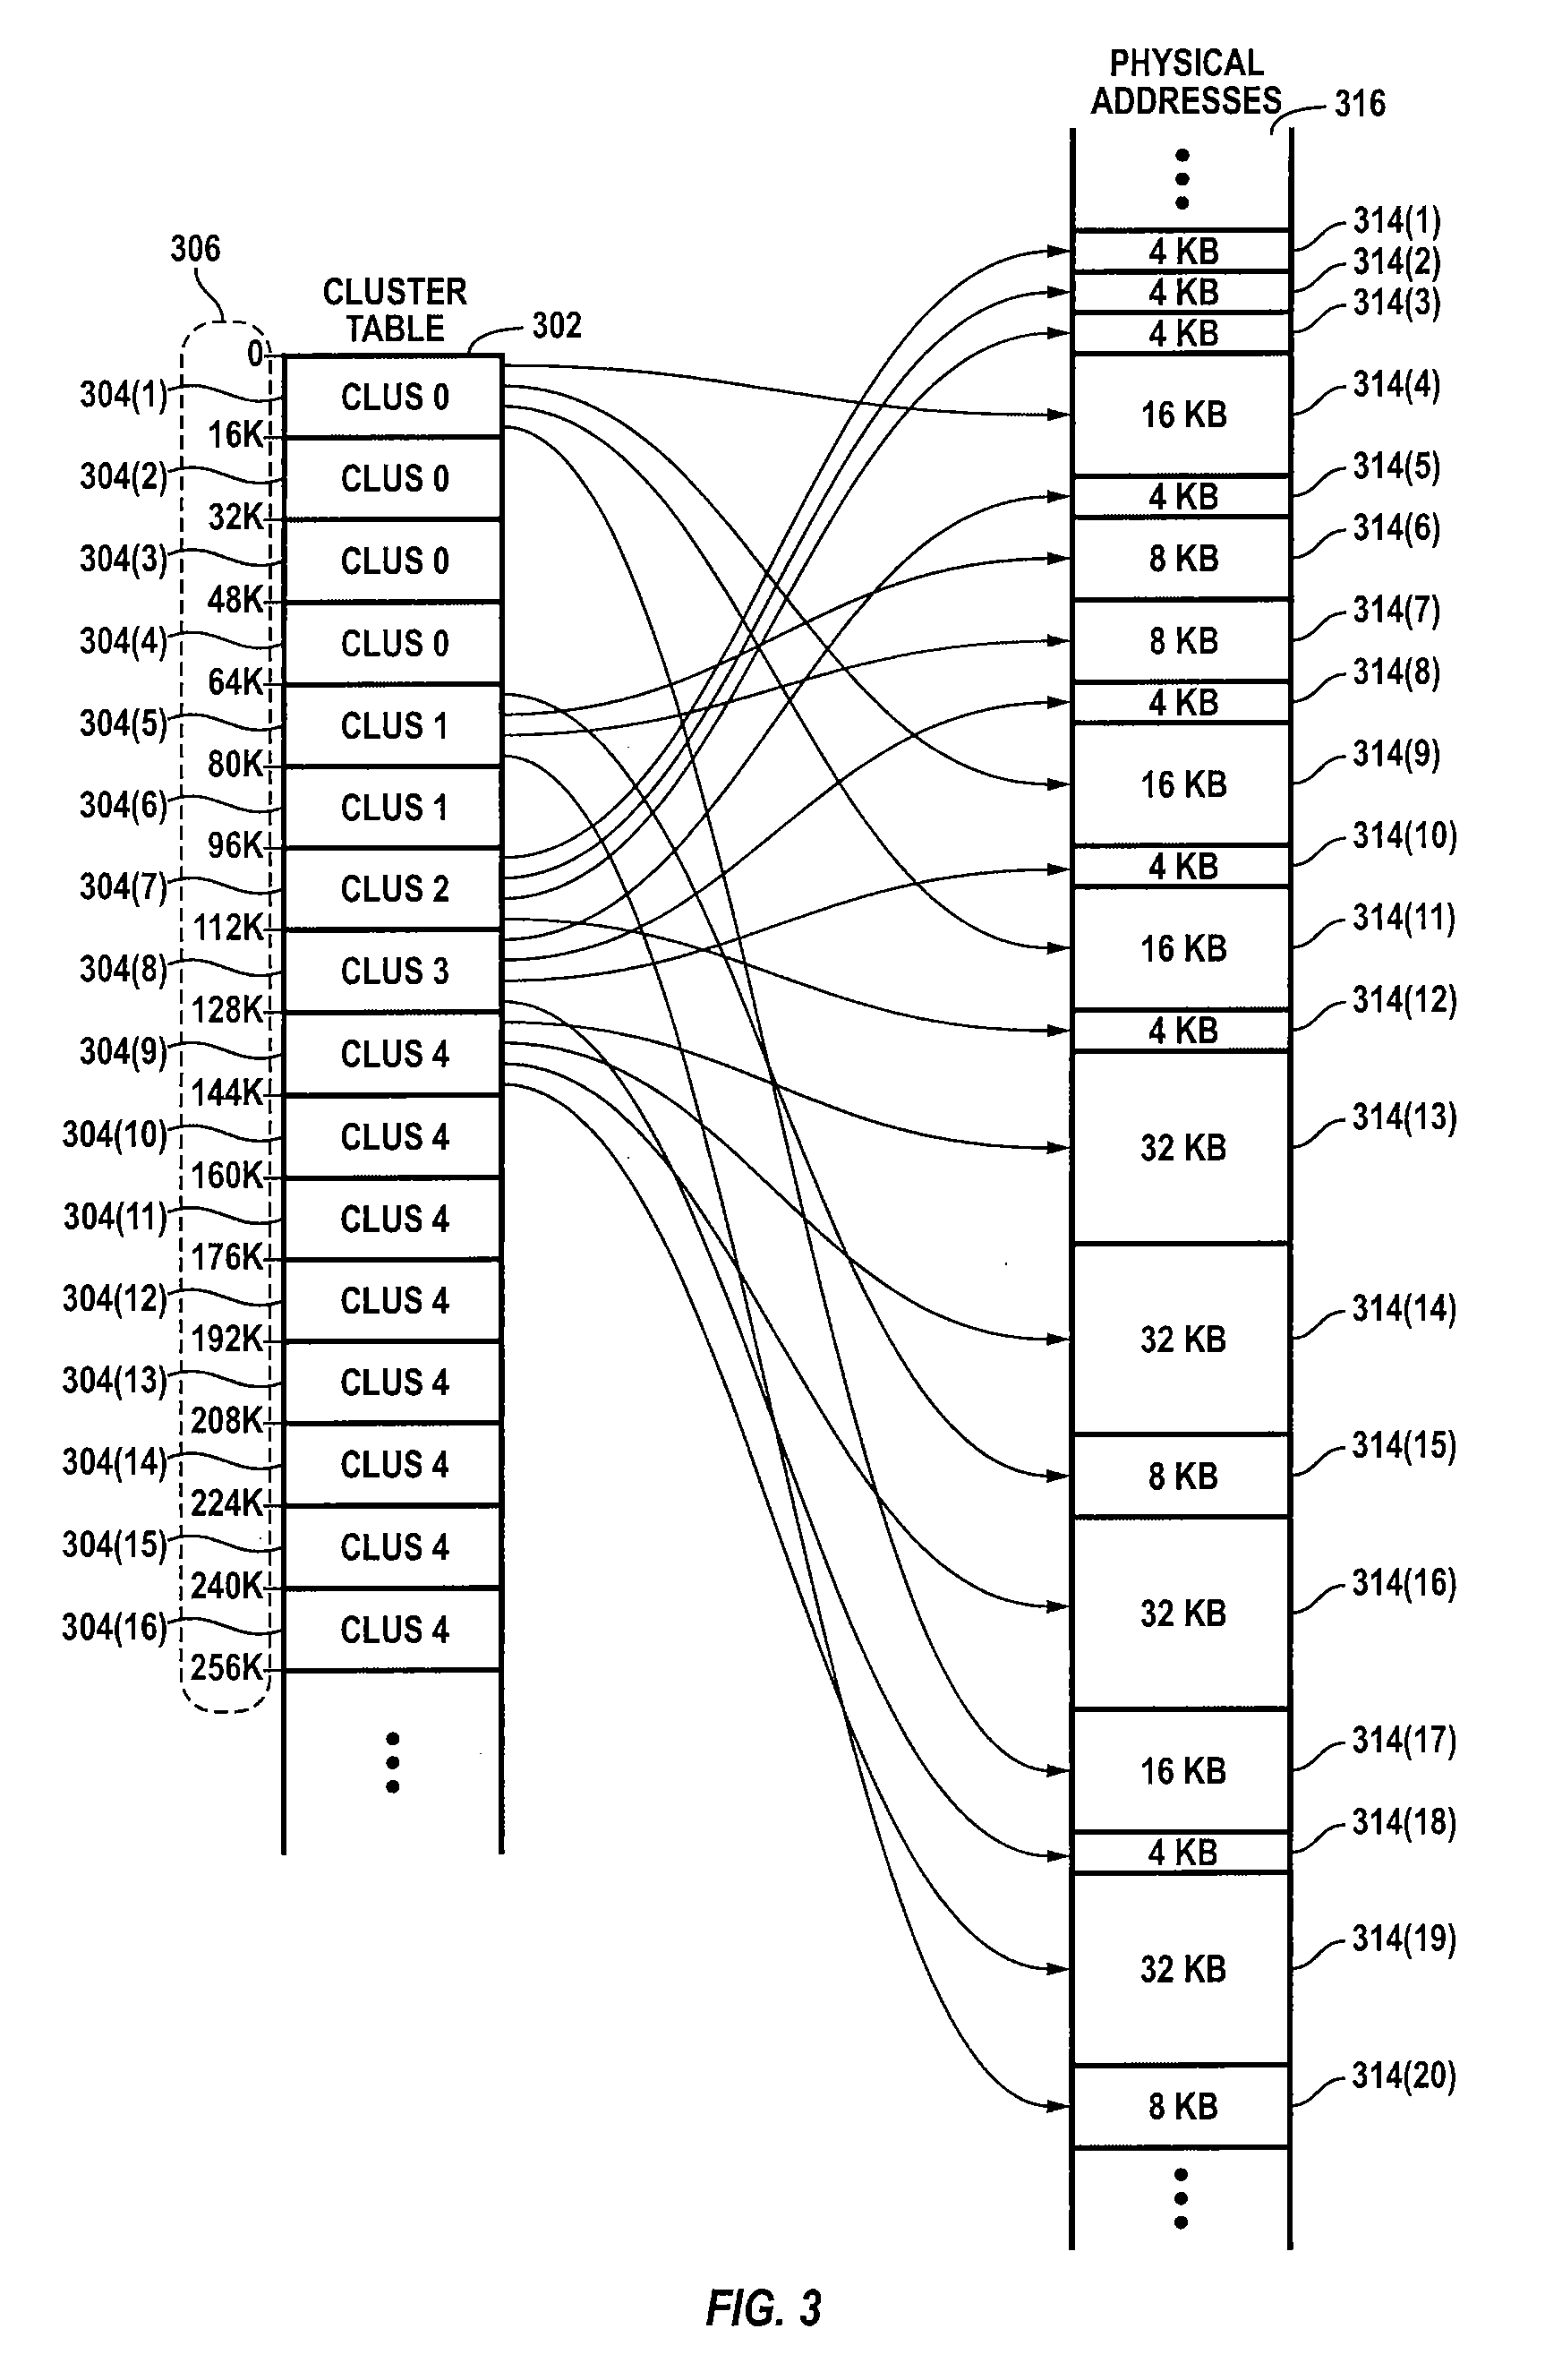 Virtual address translation system with caching of variable-range translation clusters